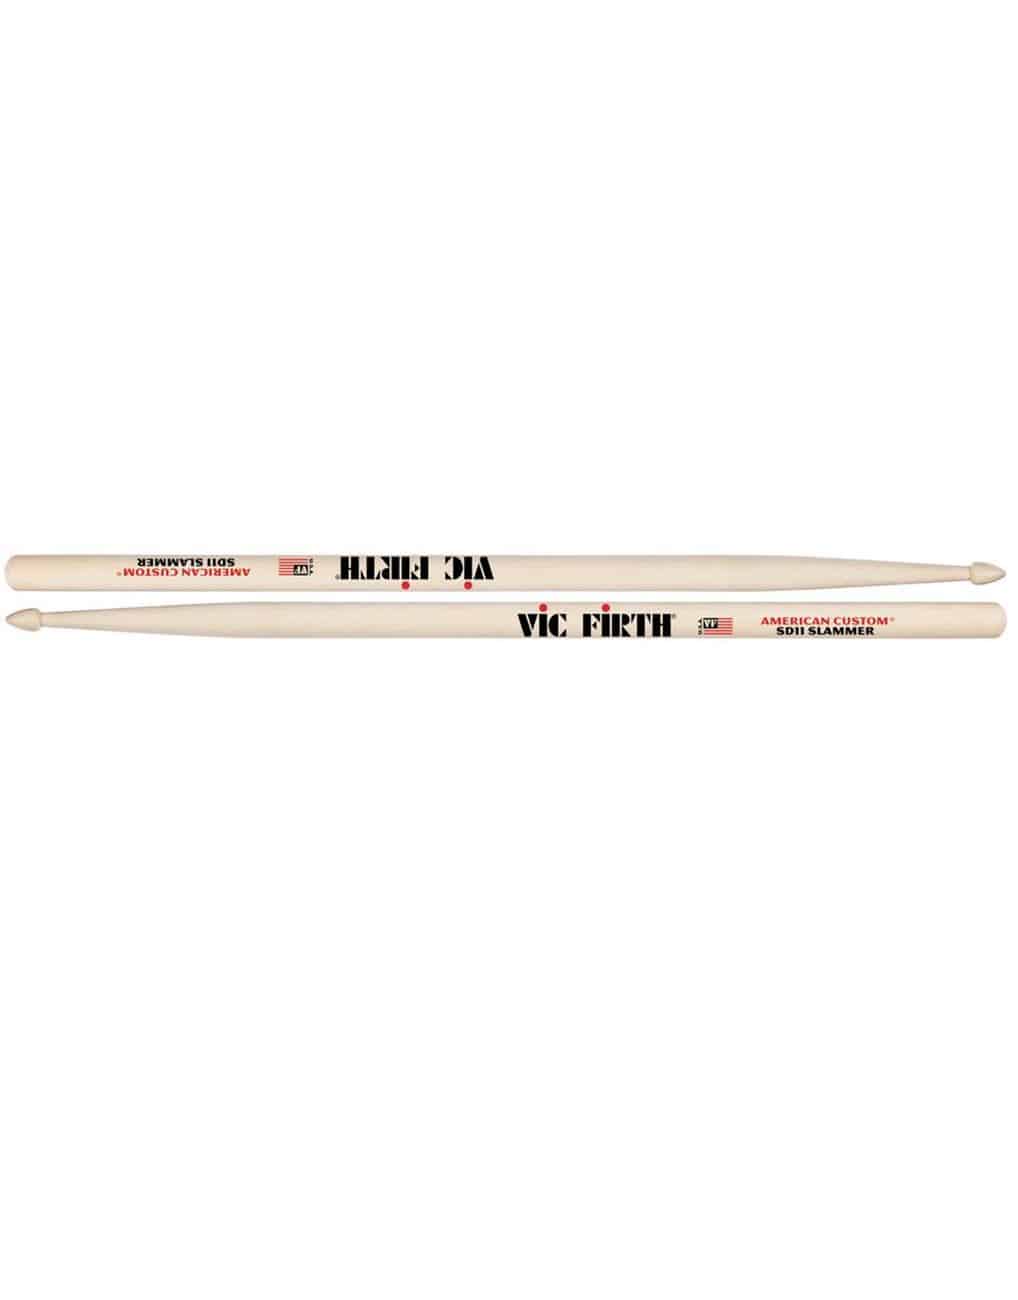 vic-firth-sd-11-wood-bagketes-huge